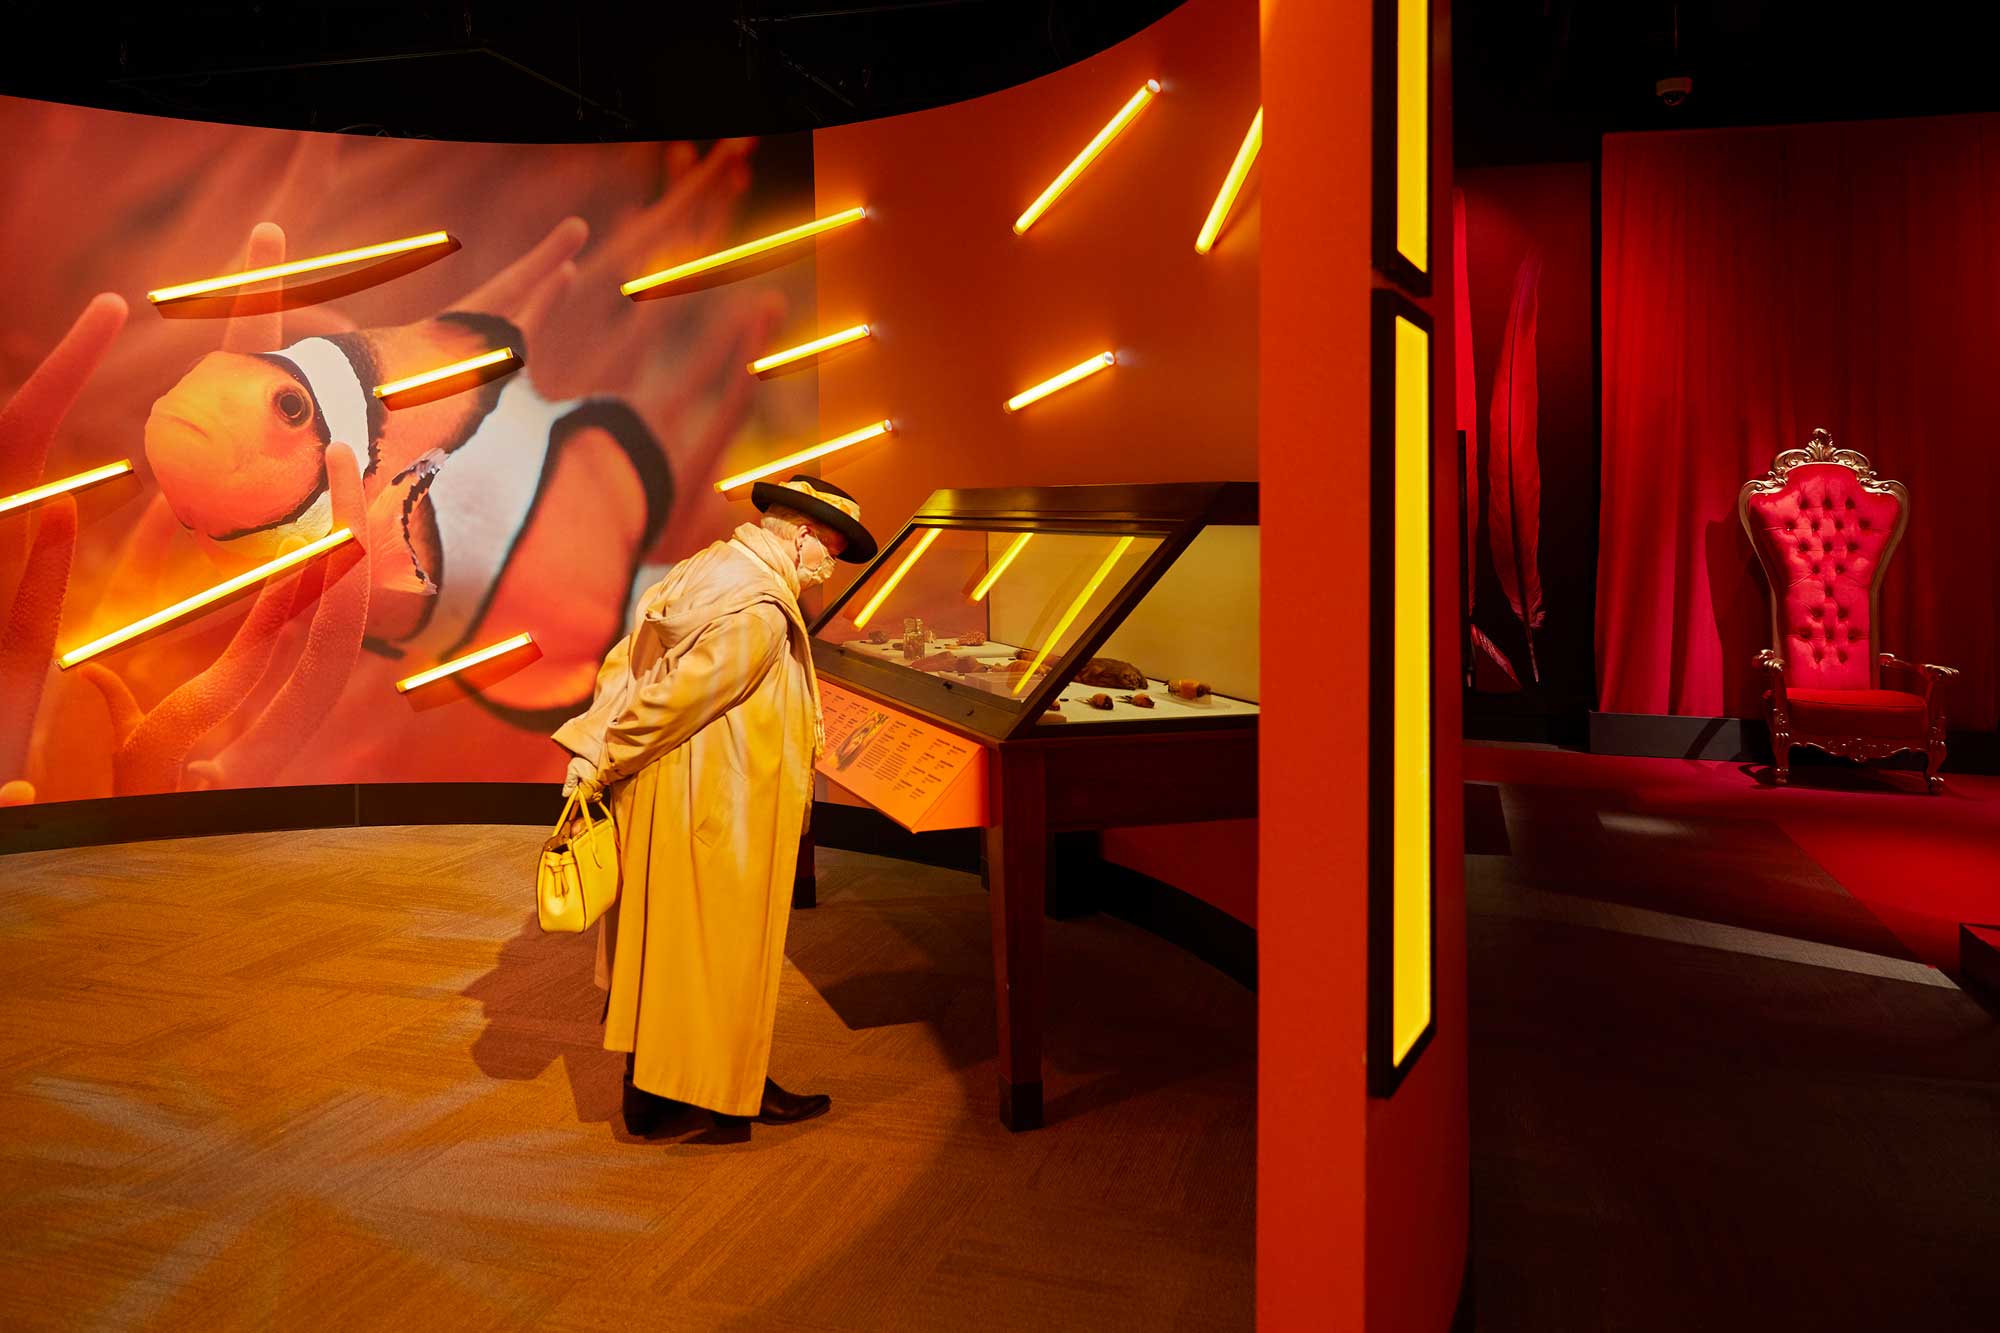 An adult reads a label on a display case in an orange gallery. The wall behind includes a giant clownfish mural and bars of orange light.